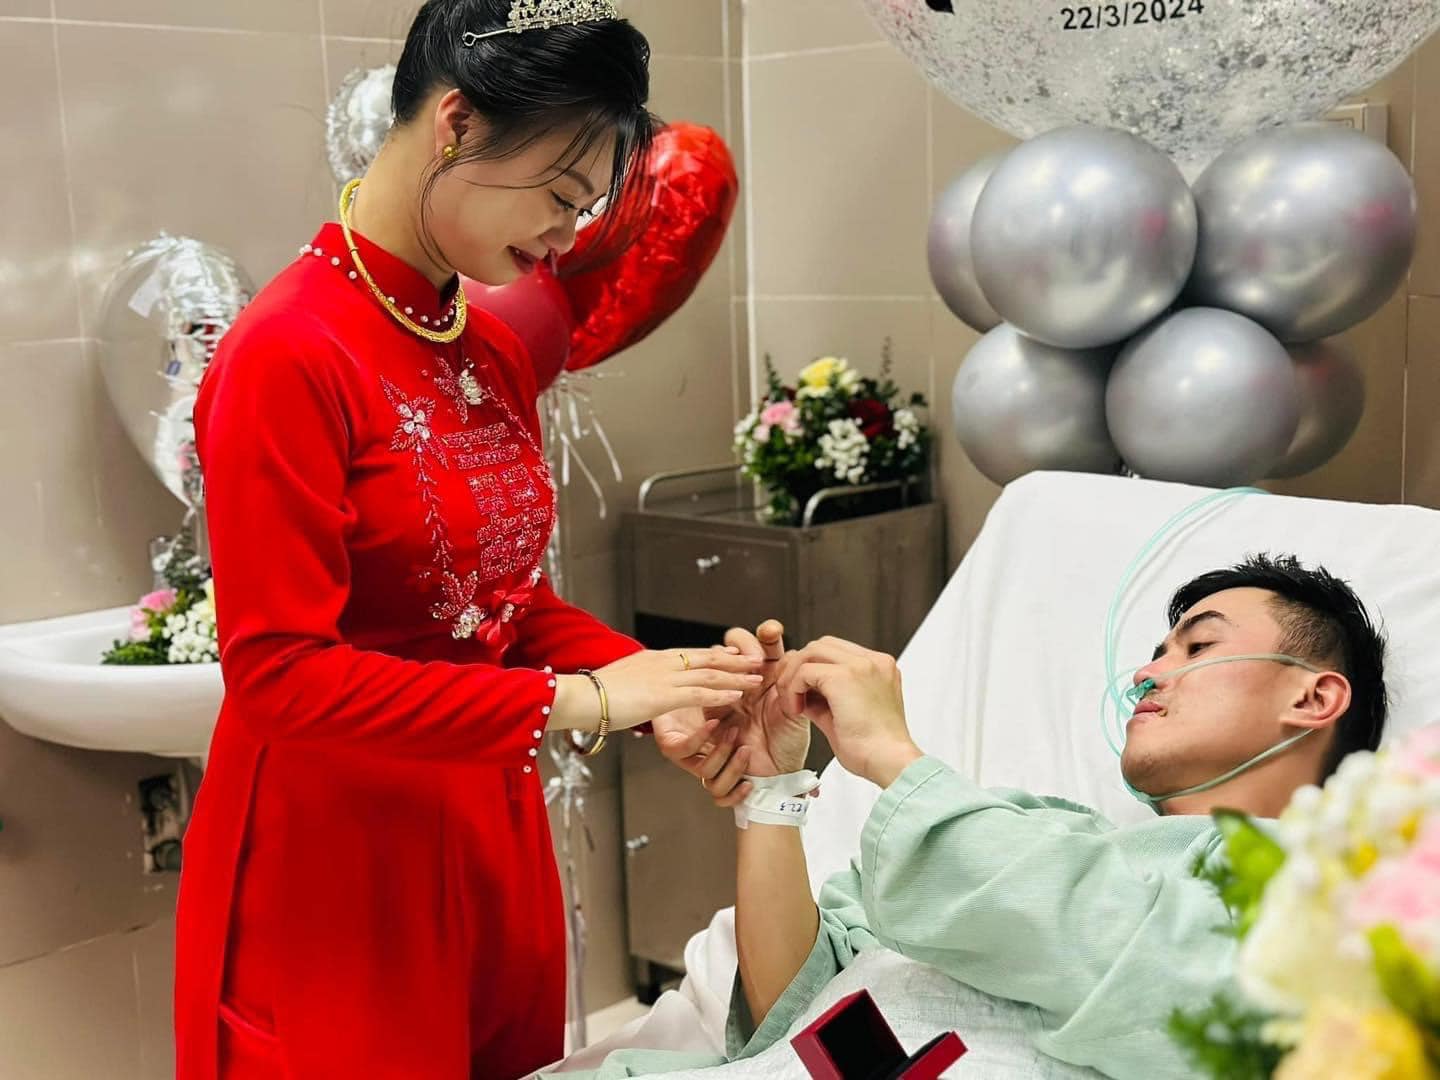 T.H. places a wedding ring on N.A.'s finger during their hospital bedside wedding at Lang Son General Hospital in Lang Son Province, northern Vietnam, March 22, 2024. Photo: Supplied